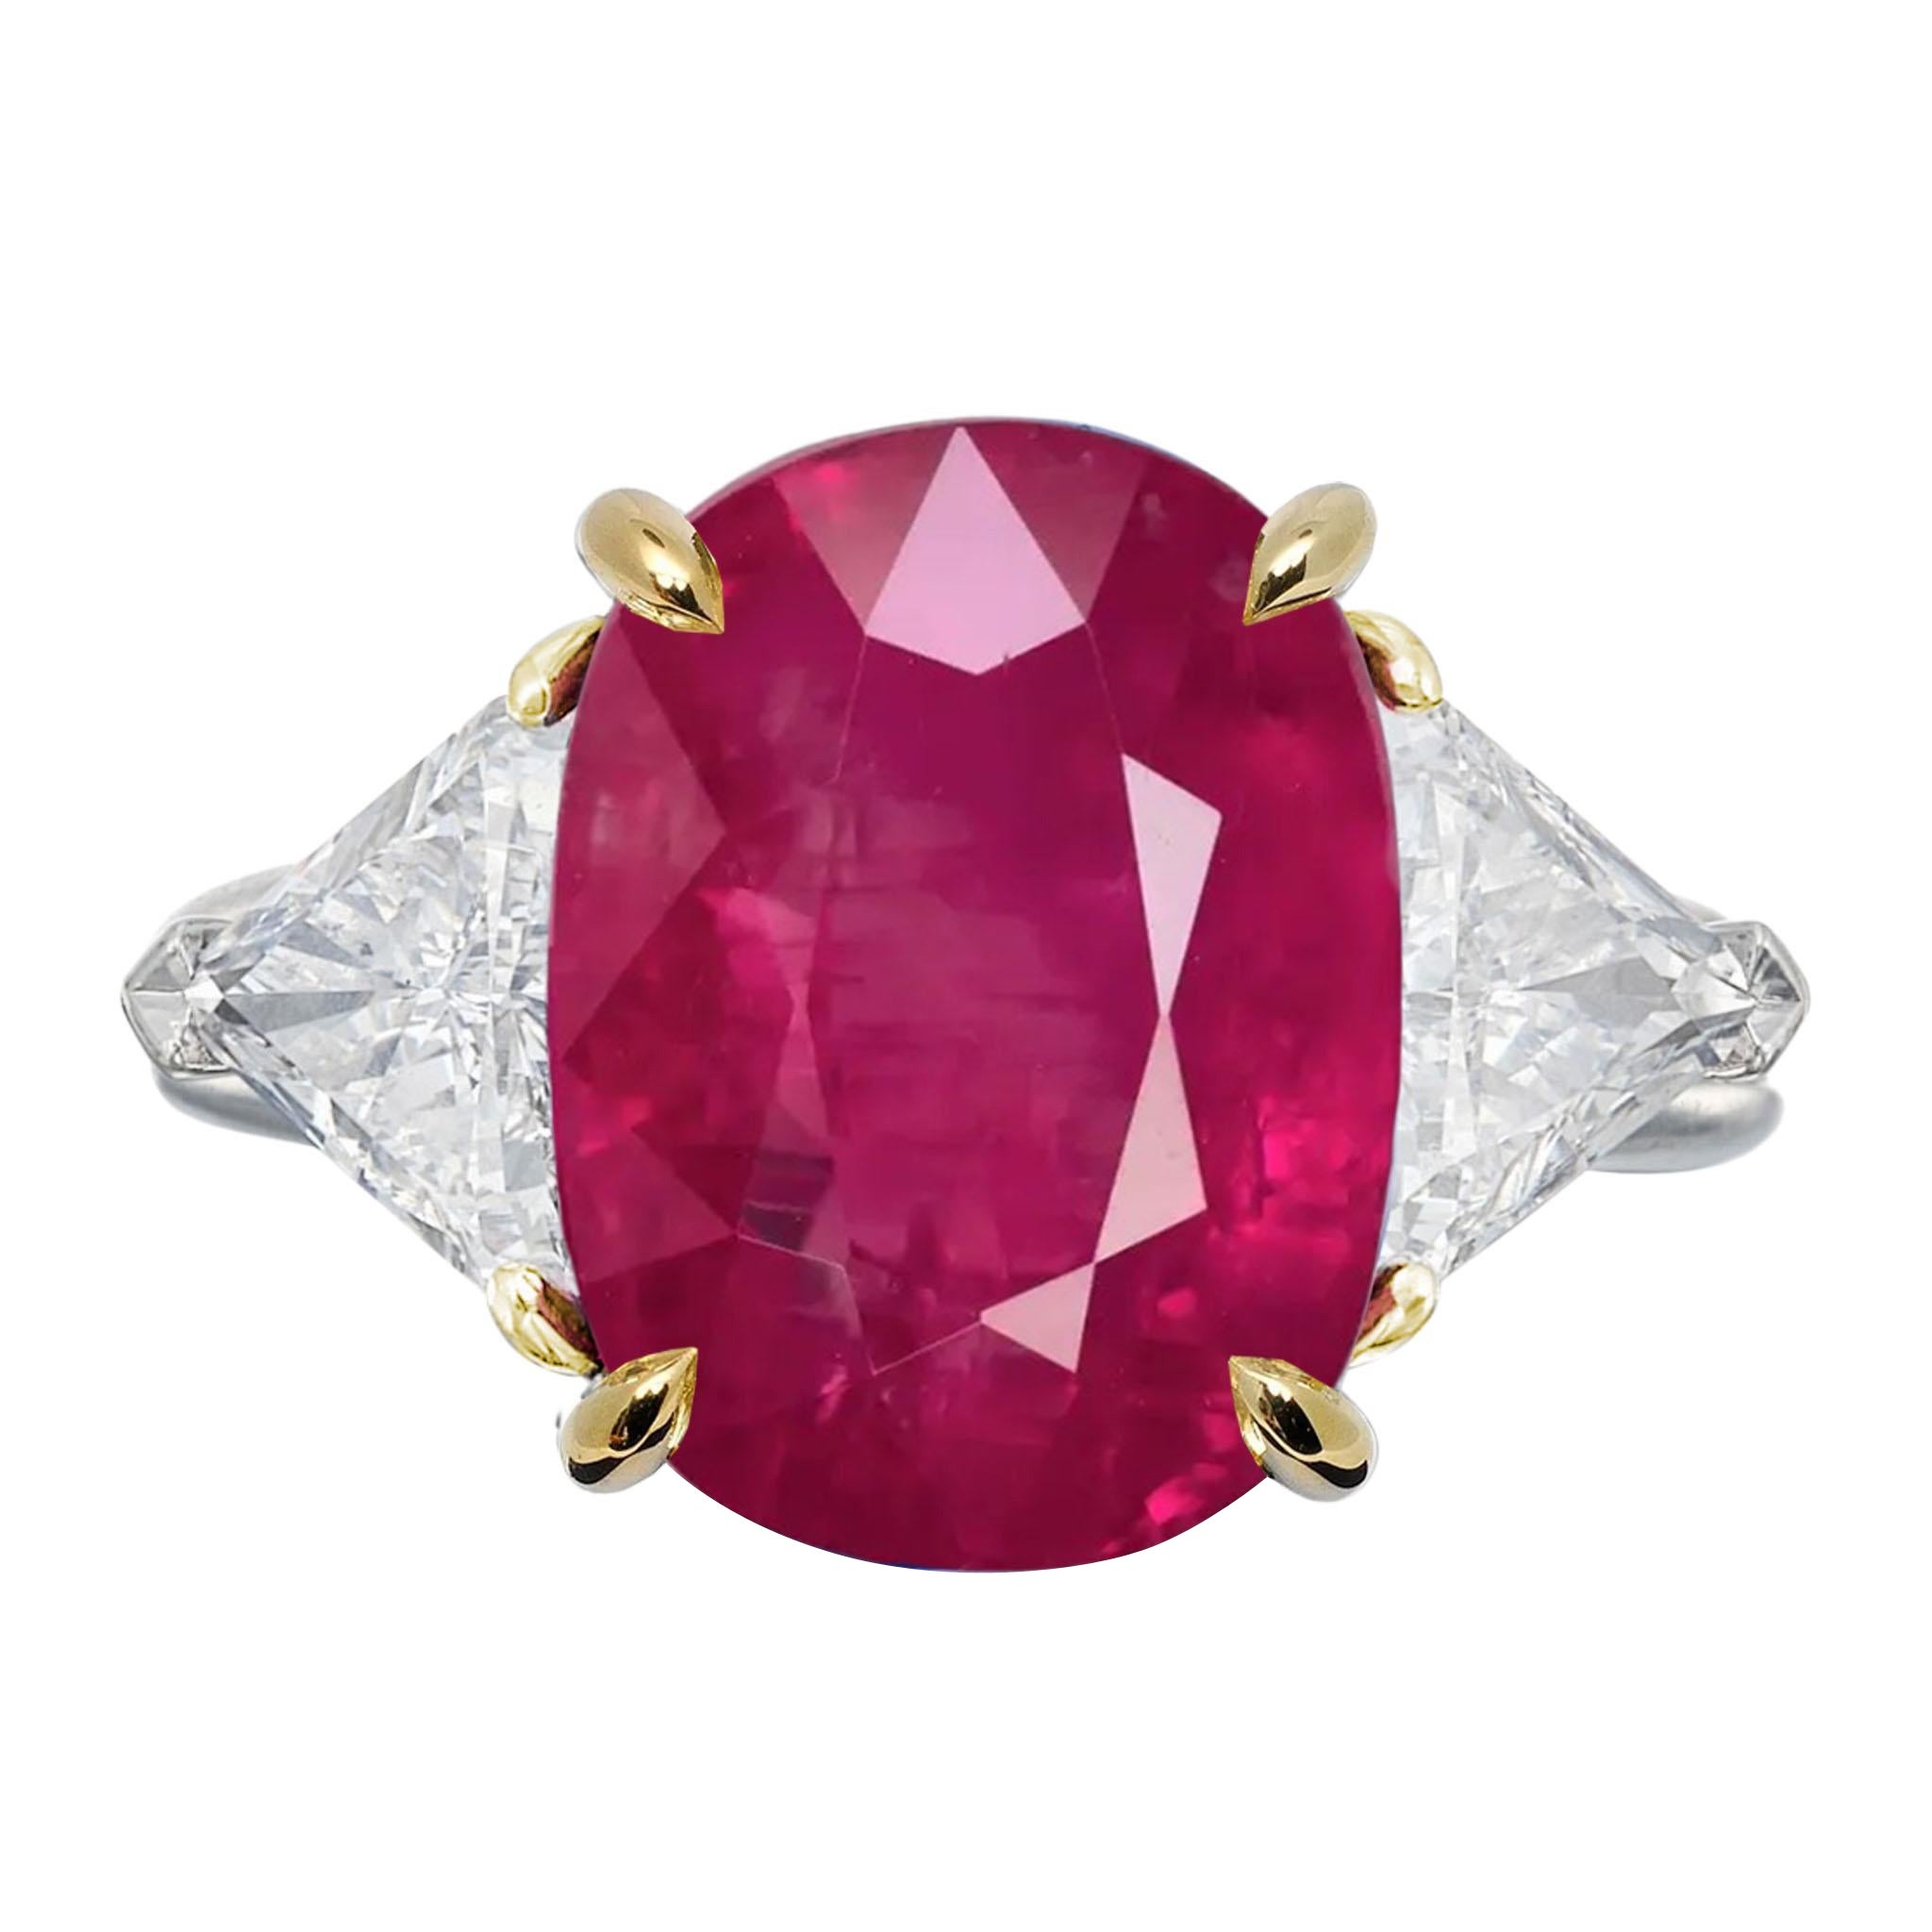 GRS Certified 4.76 Carat Natural Untreated Unheated Red Ruby Diamond Ring